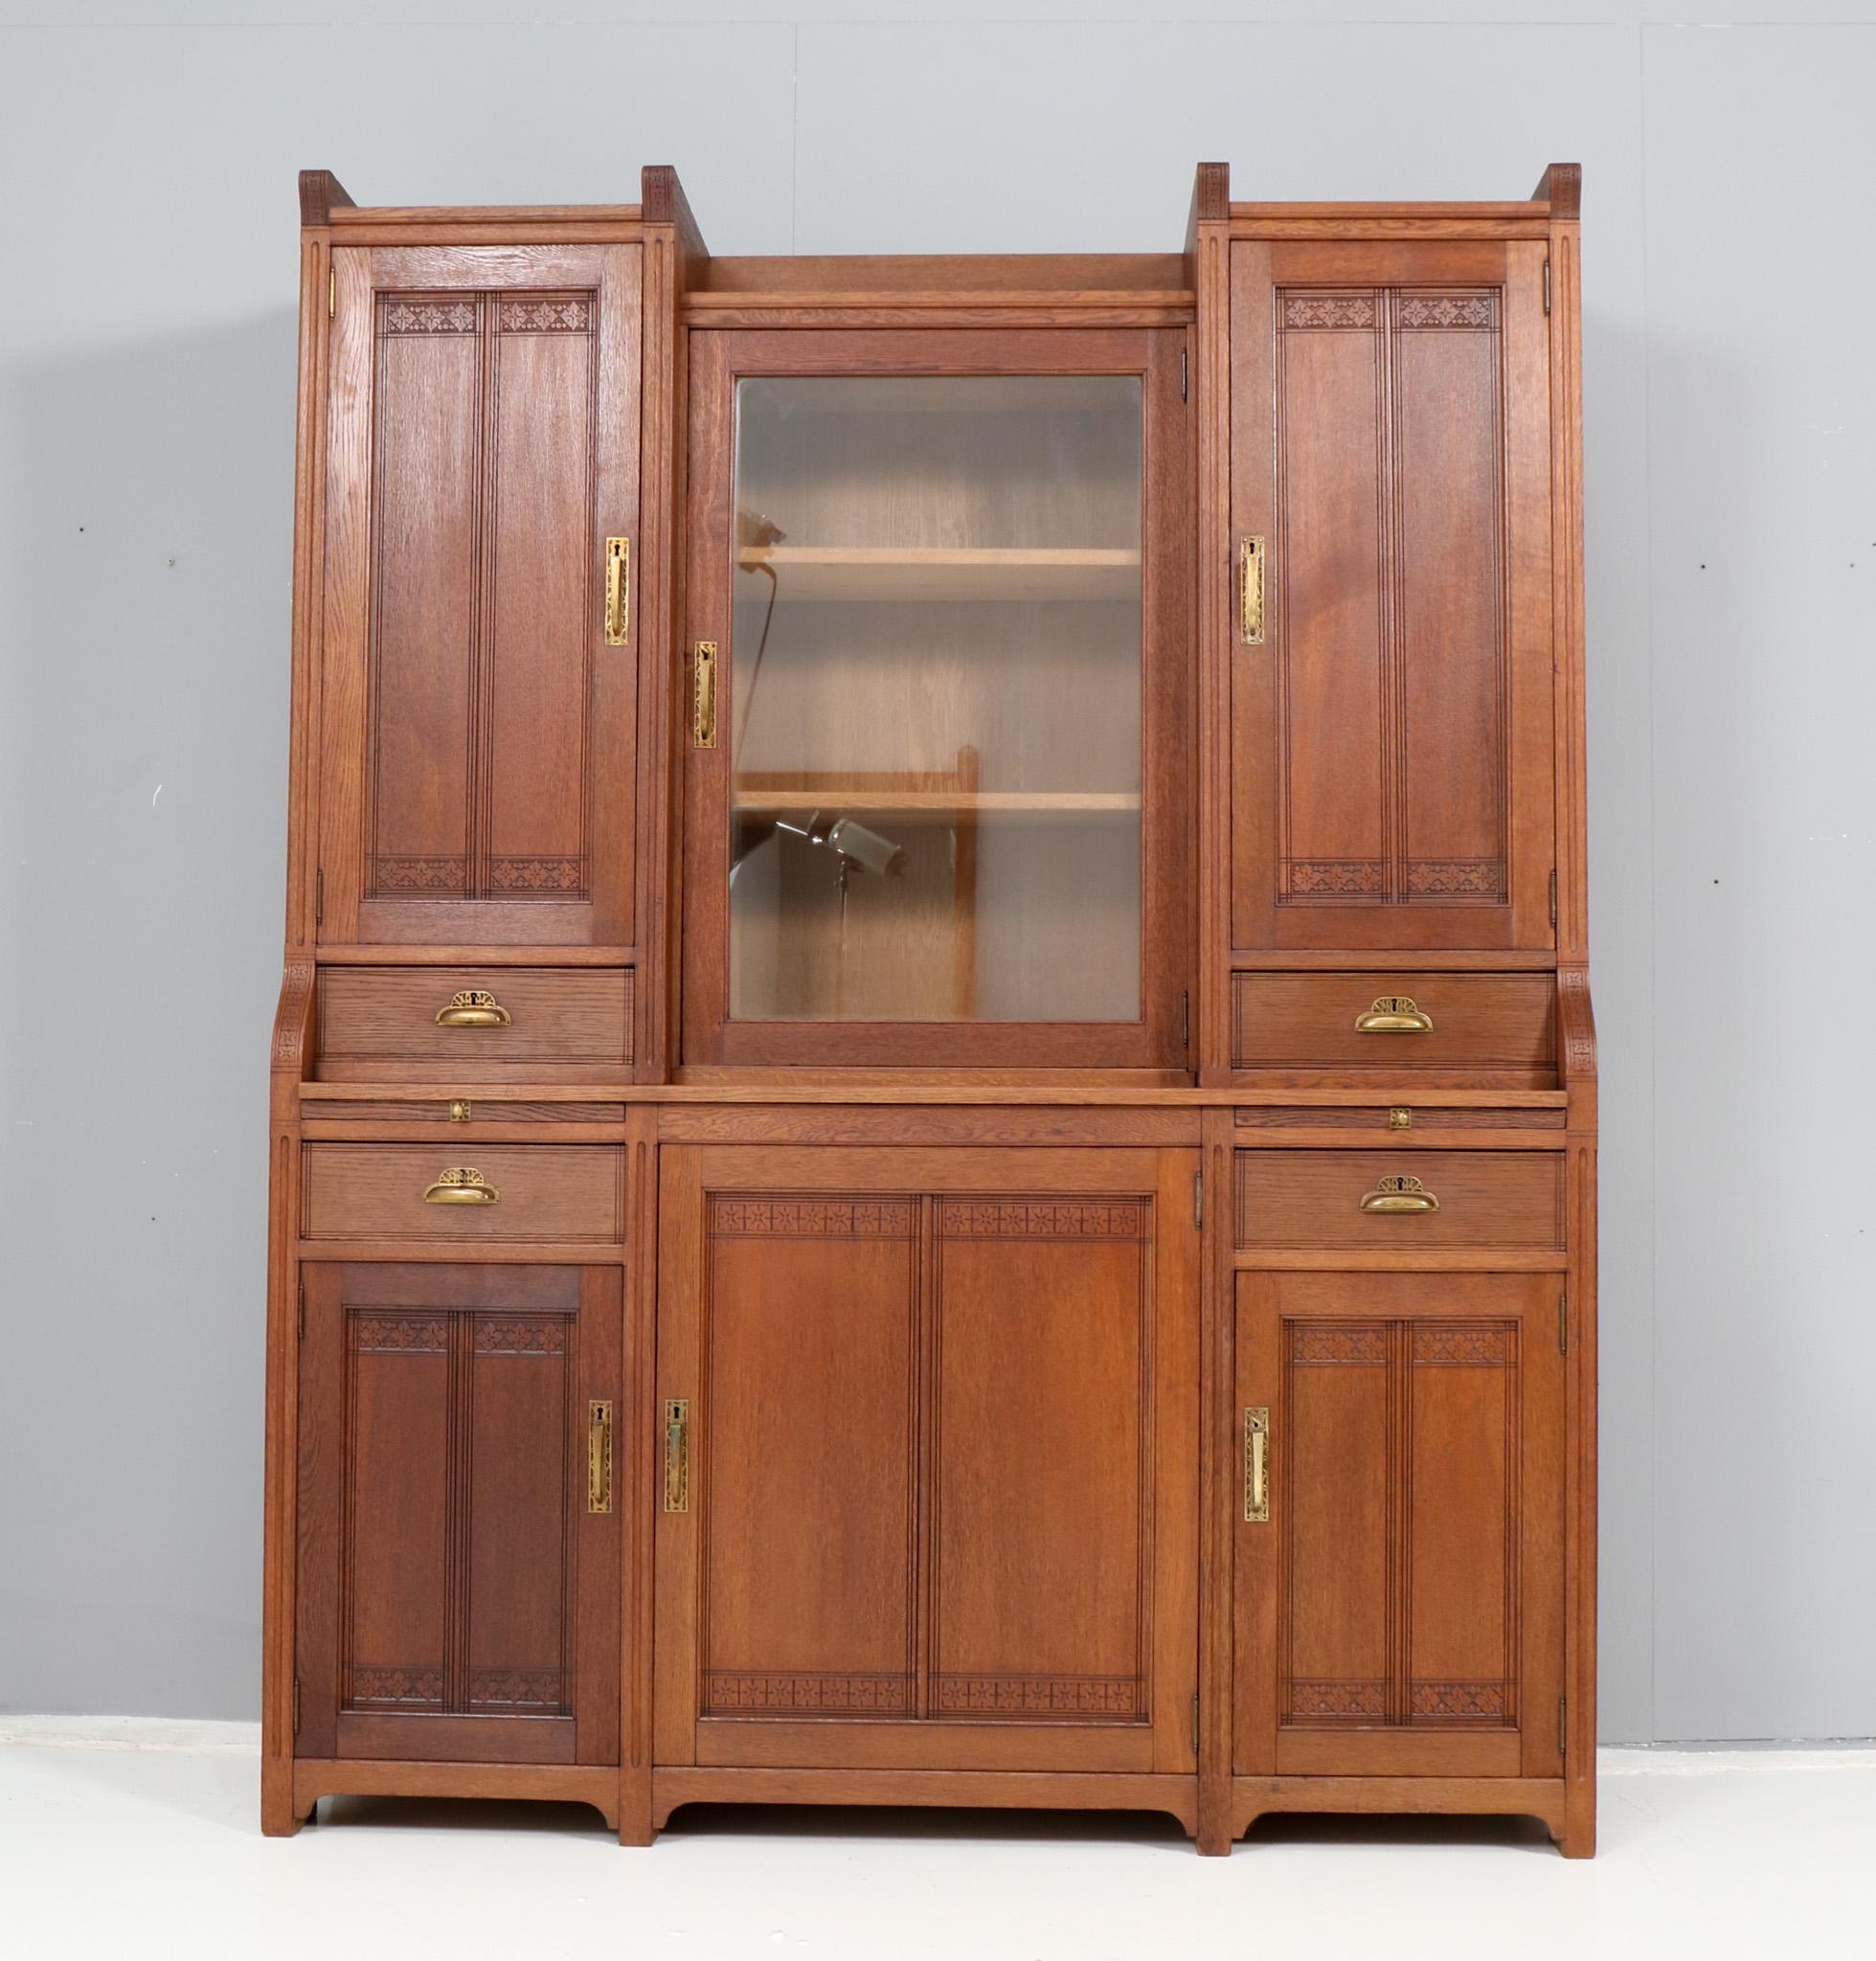 Magnificent and ultra rare Art Nouveau Arts & Crafts bookcase.
Design by H.F. Jansen & Zonen Amsterdam.
Striking Dutch design from circa 1905.
Solid oak base with original hand-carved decorative elements.
All six doors have the original decorative